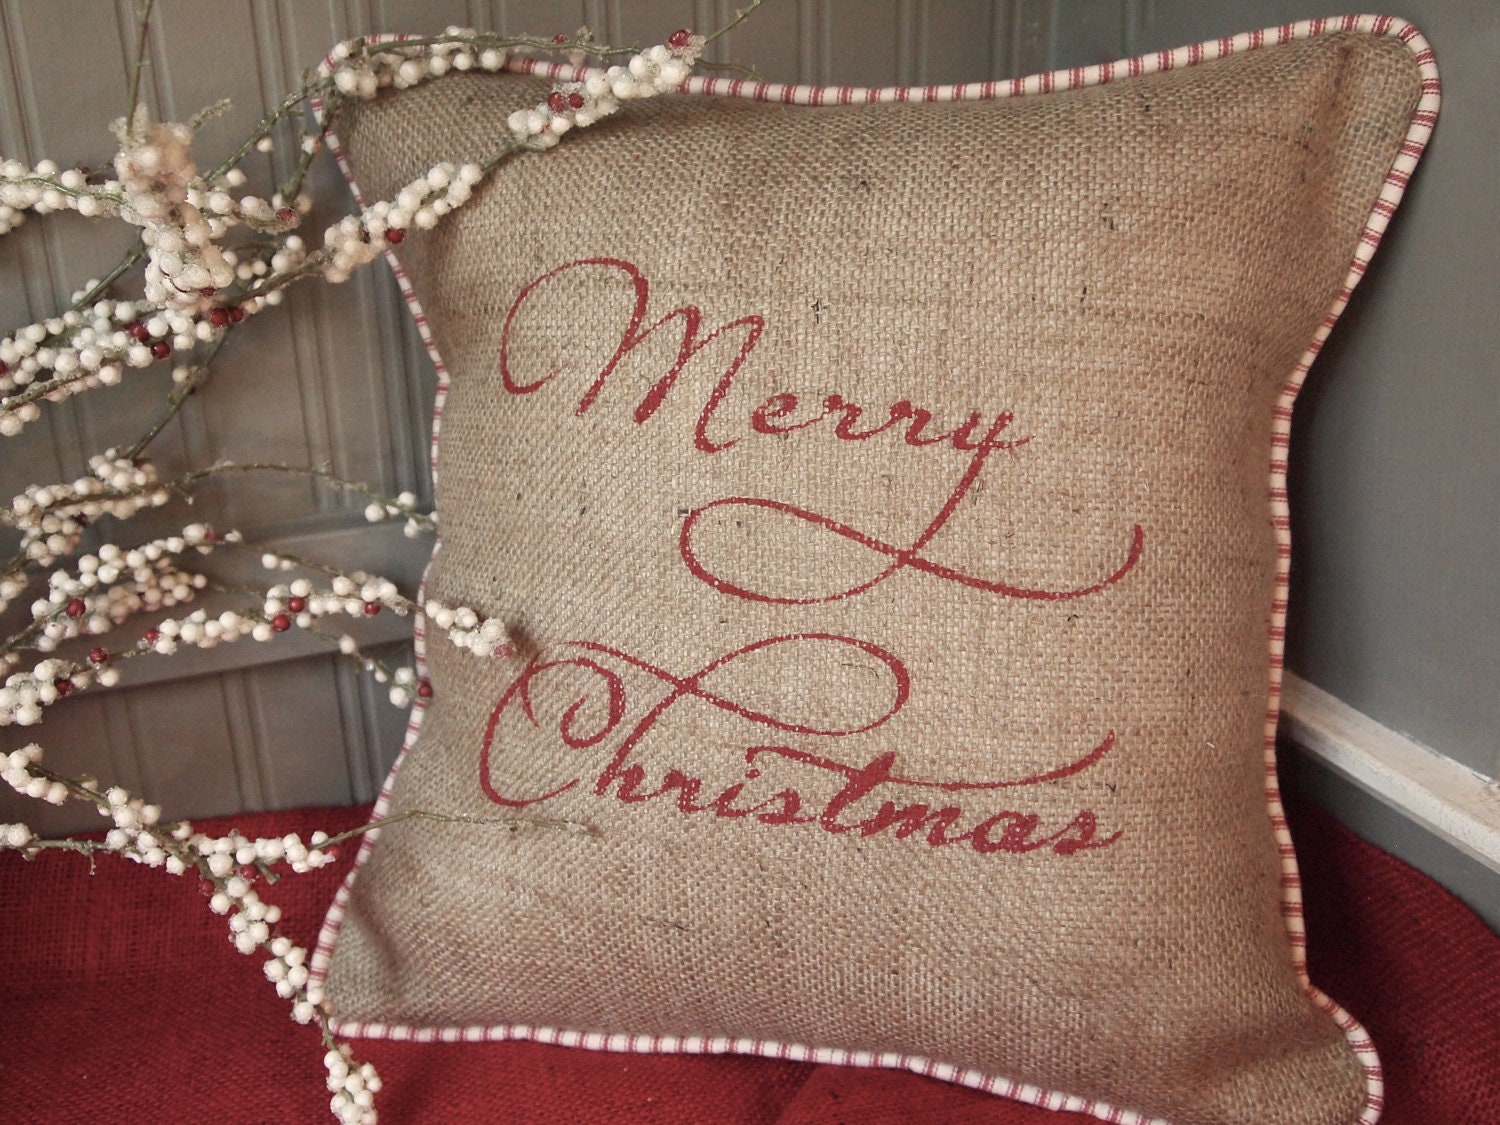 Merry Christmas hand painted in red on natural  burlap pillow cover with red and white french ticking, piping